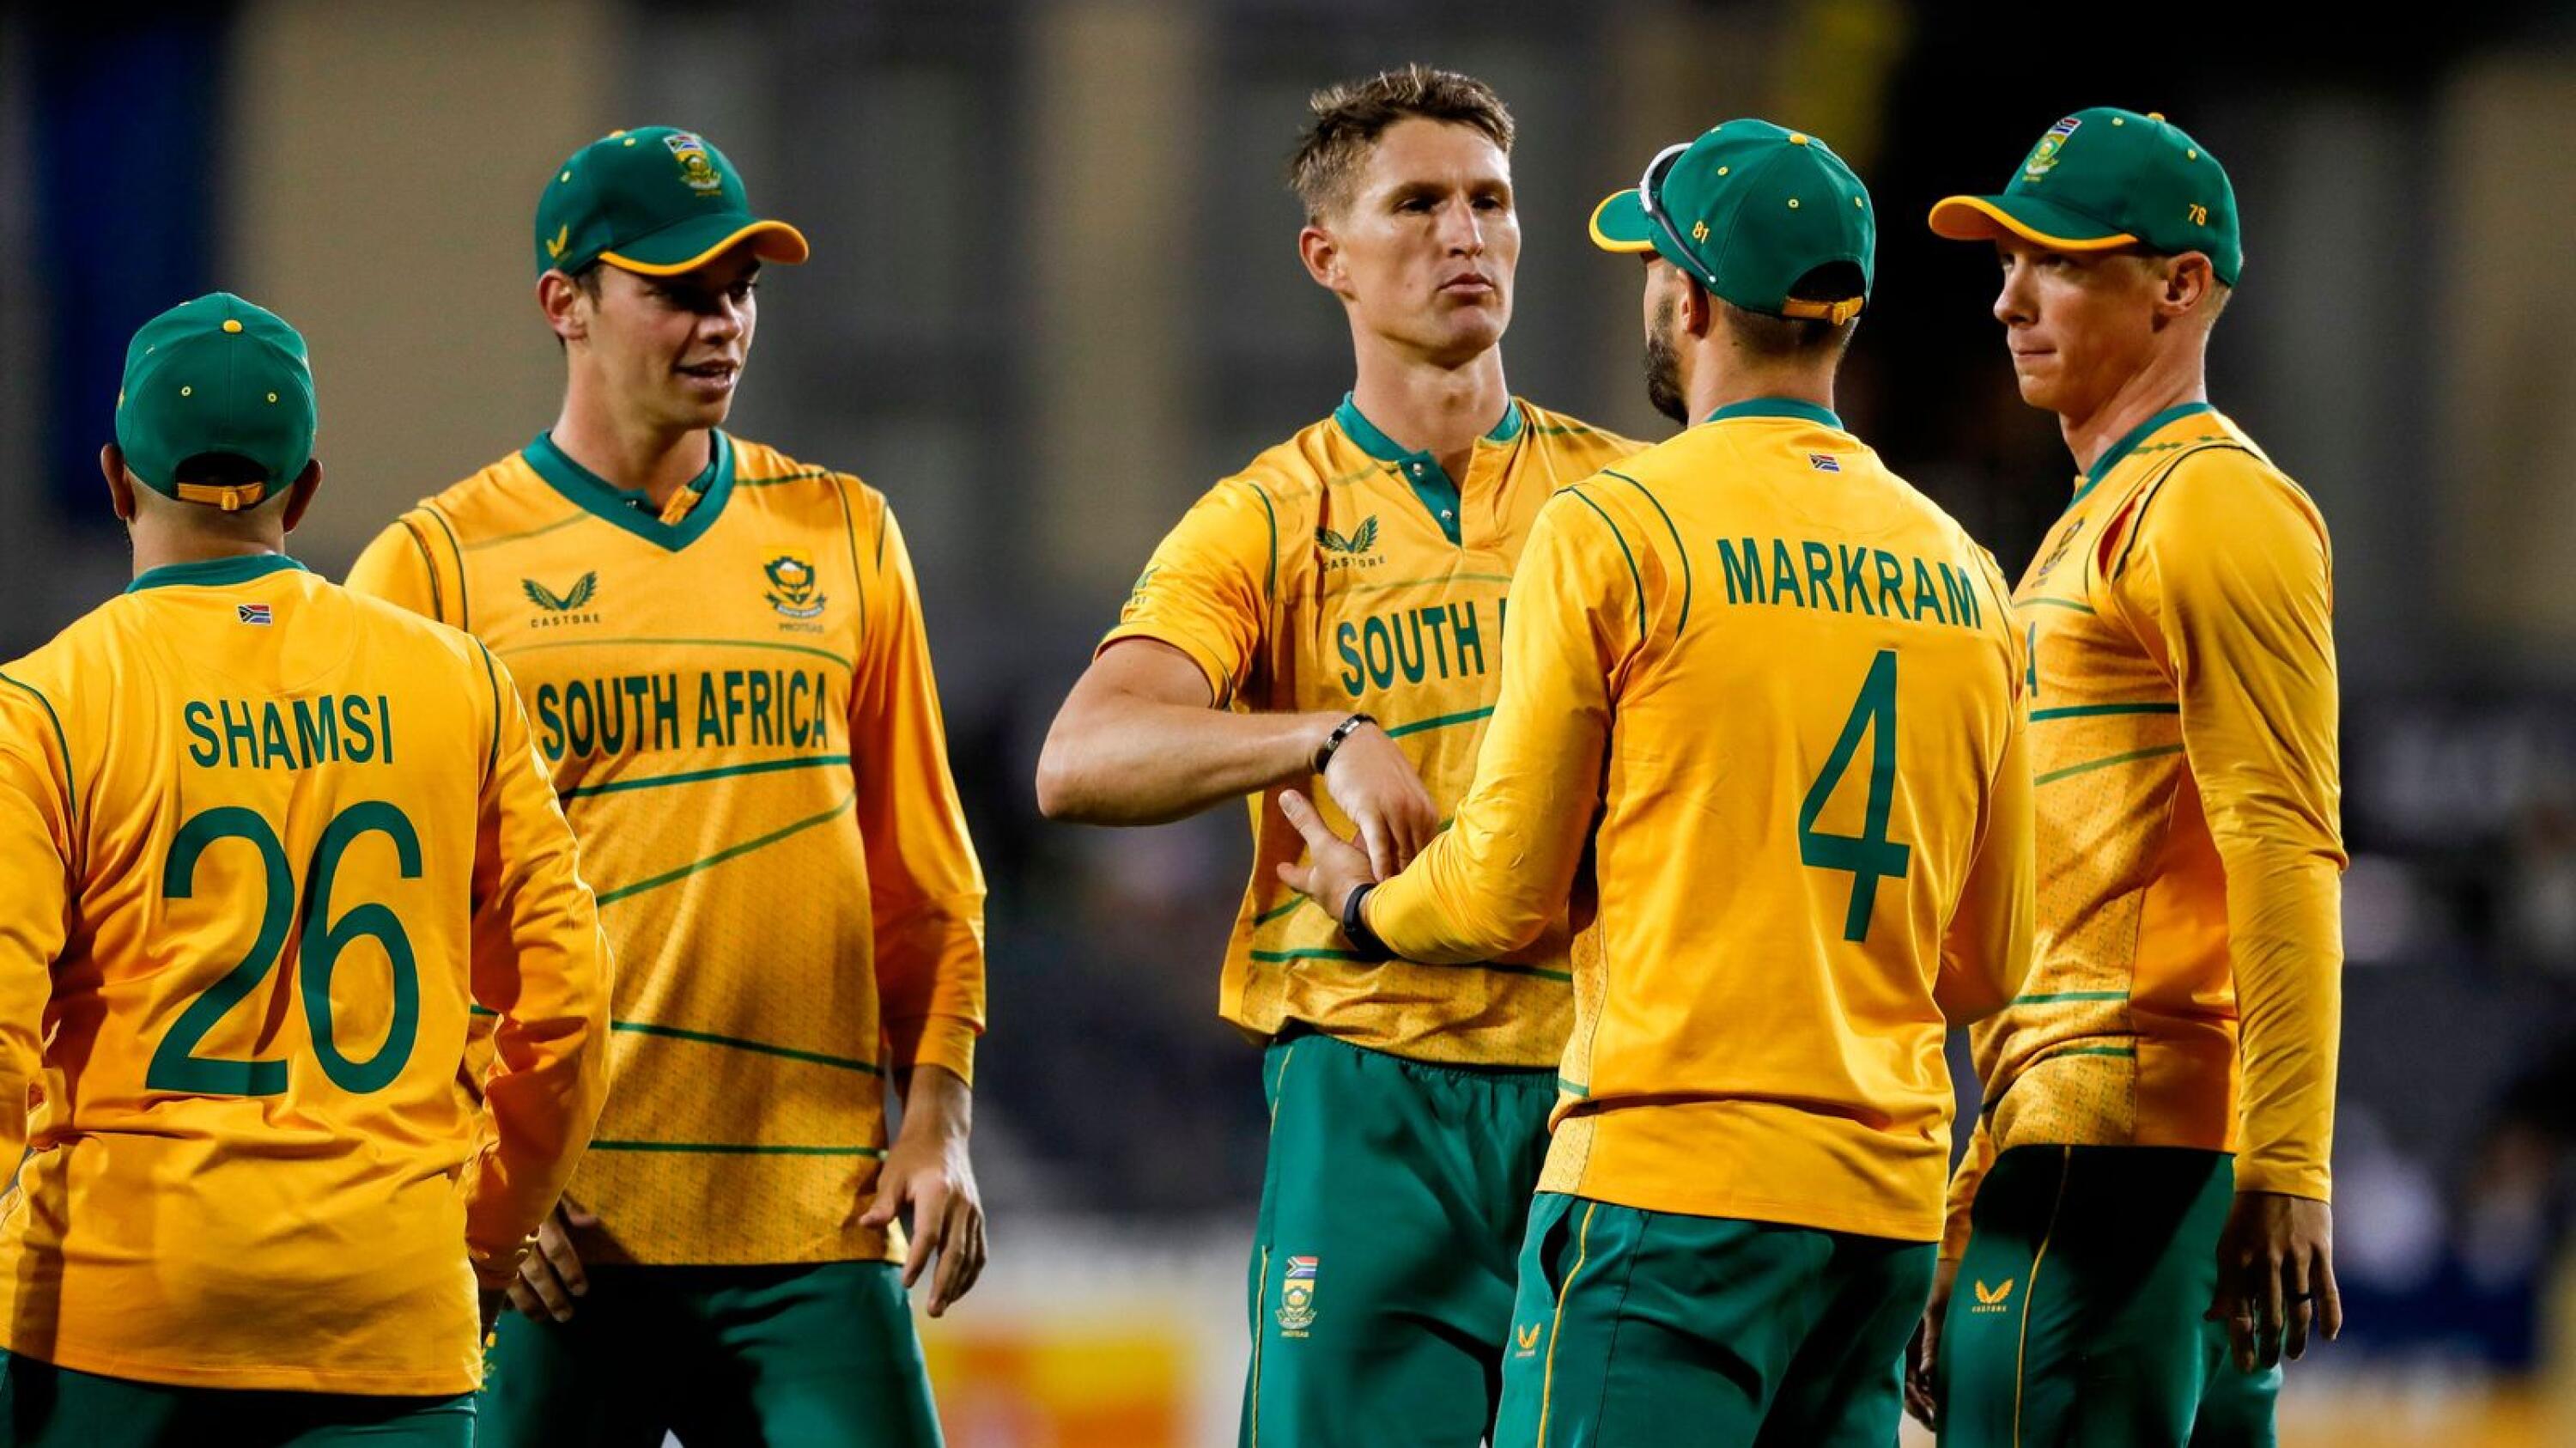 The Proteas celebrate a wicket during a T20 International against Ireland in England